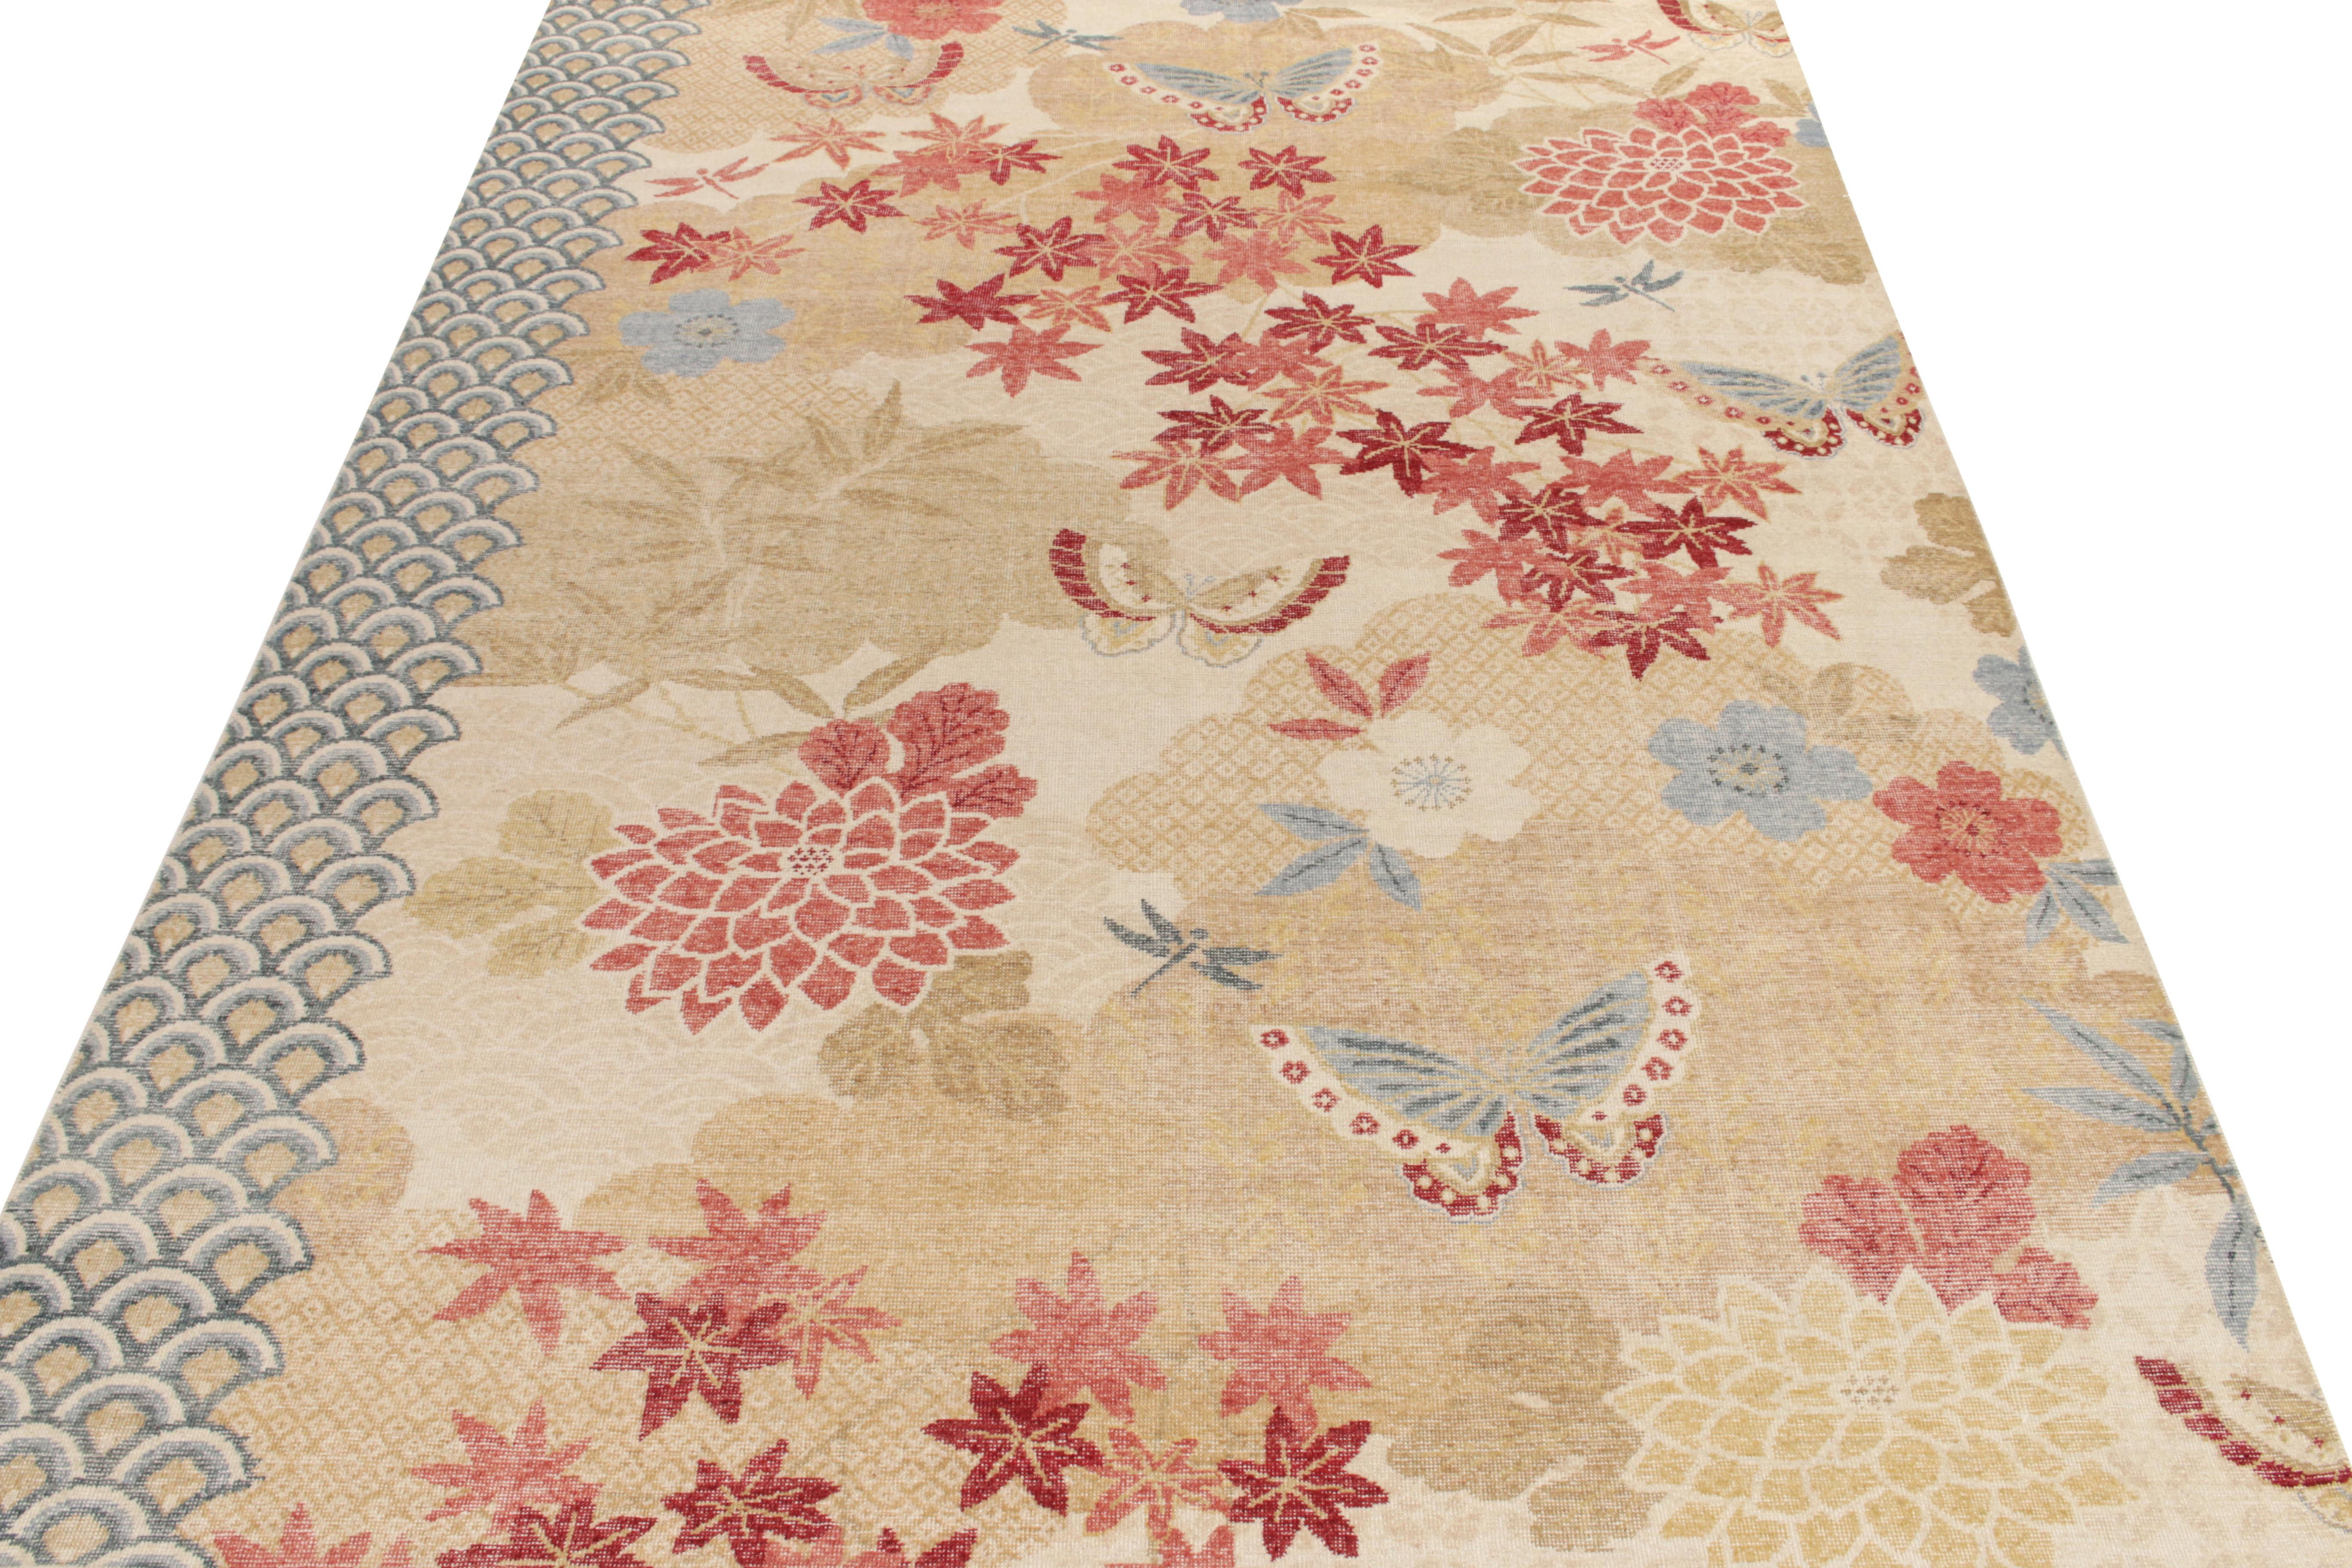 From Rug & Kilim’s Homage collection, a 9x12 distressed style piece inspired from Japanese deco pictorials, featuring an elegant blend of butterflies and florals in subtle red, blue and beige colorways on a cream backdrop transitioning smoothly for